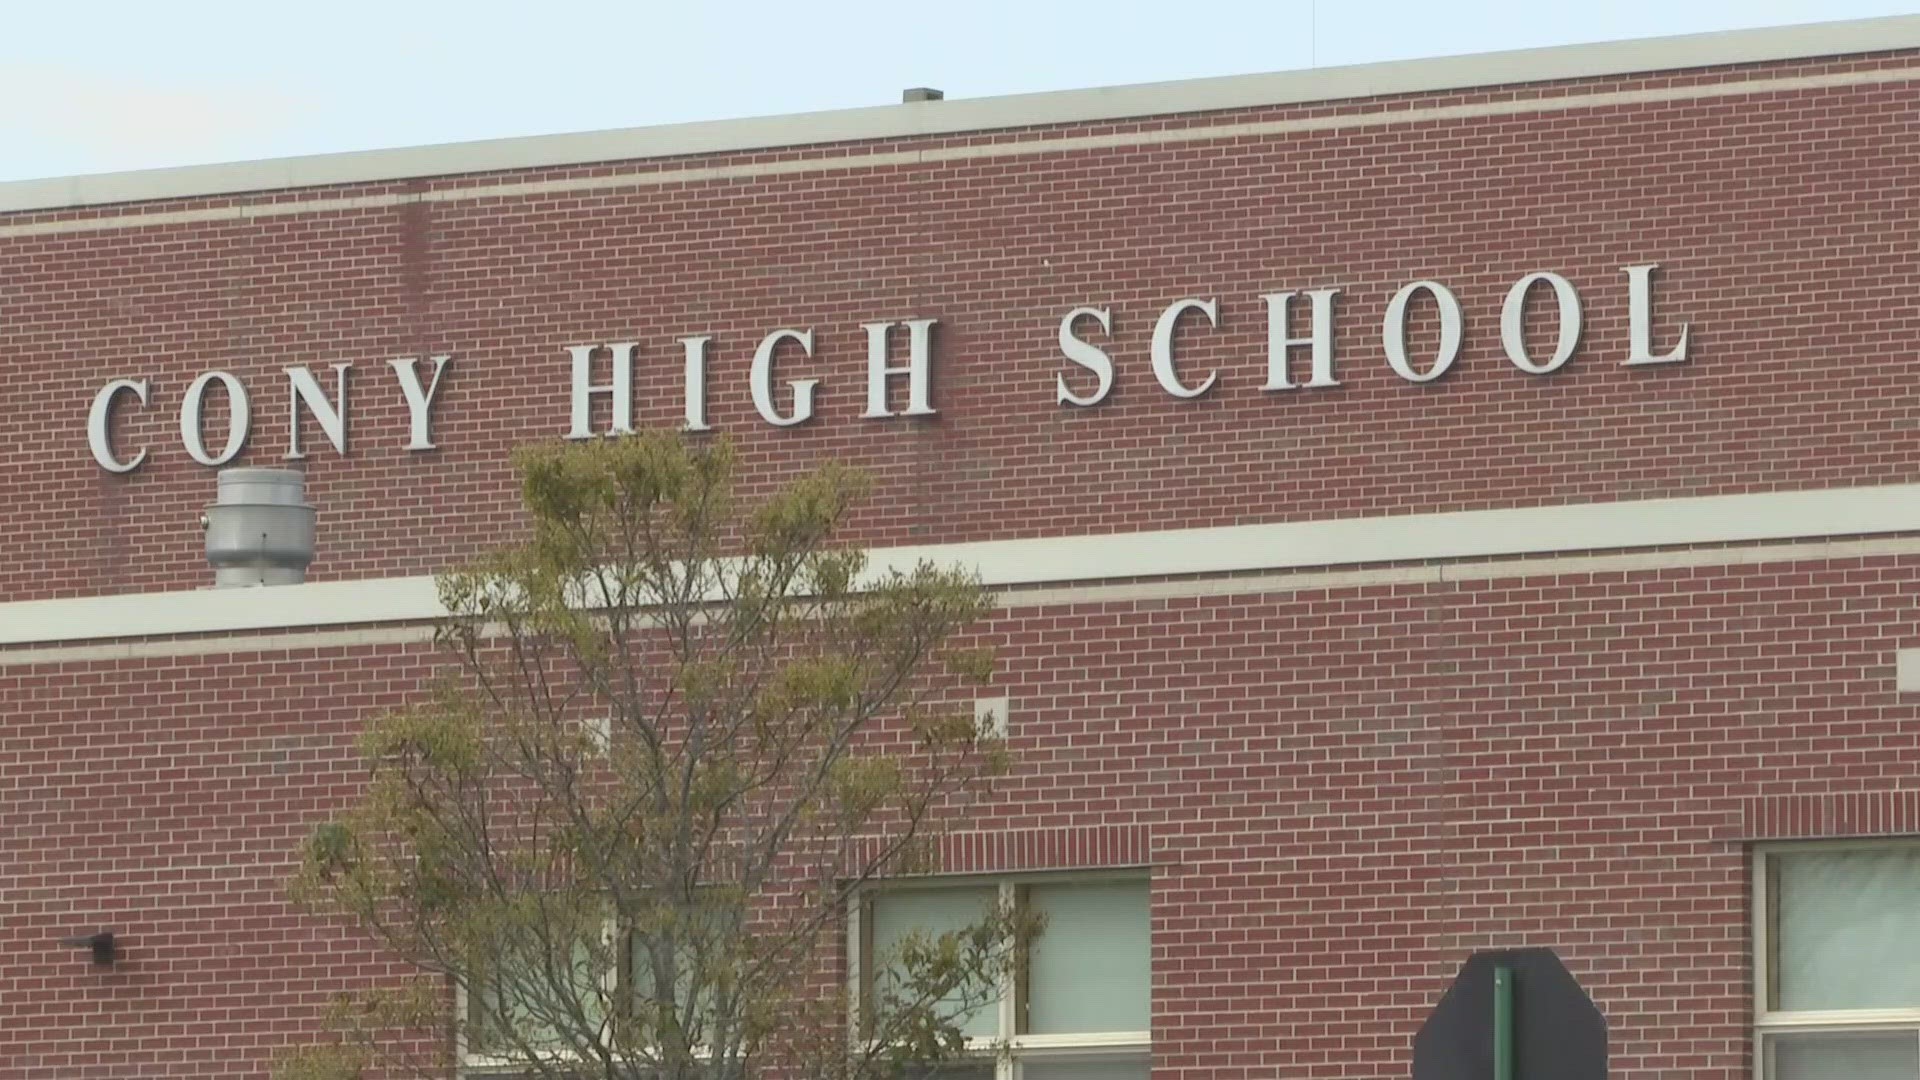 School officials and the school resource officer received "concerning information" that a student may have had a weapon in the school early Thursday afternoon.